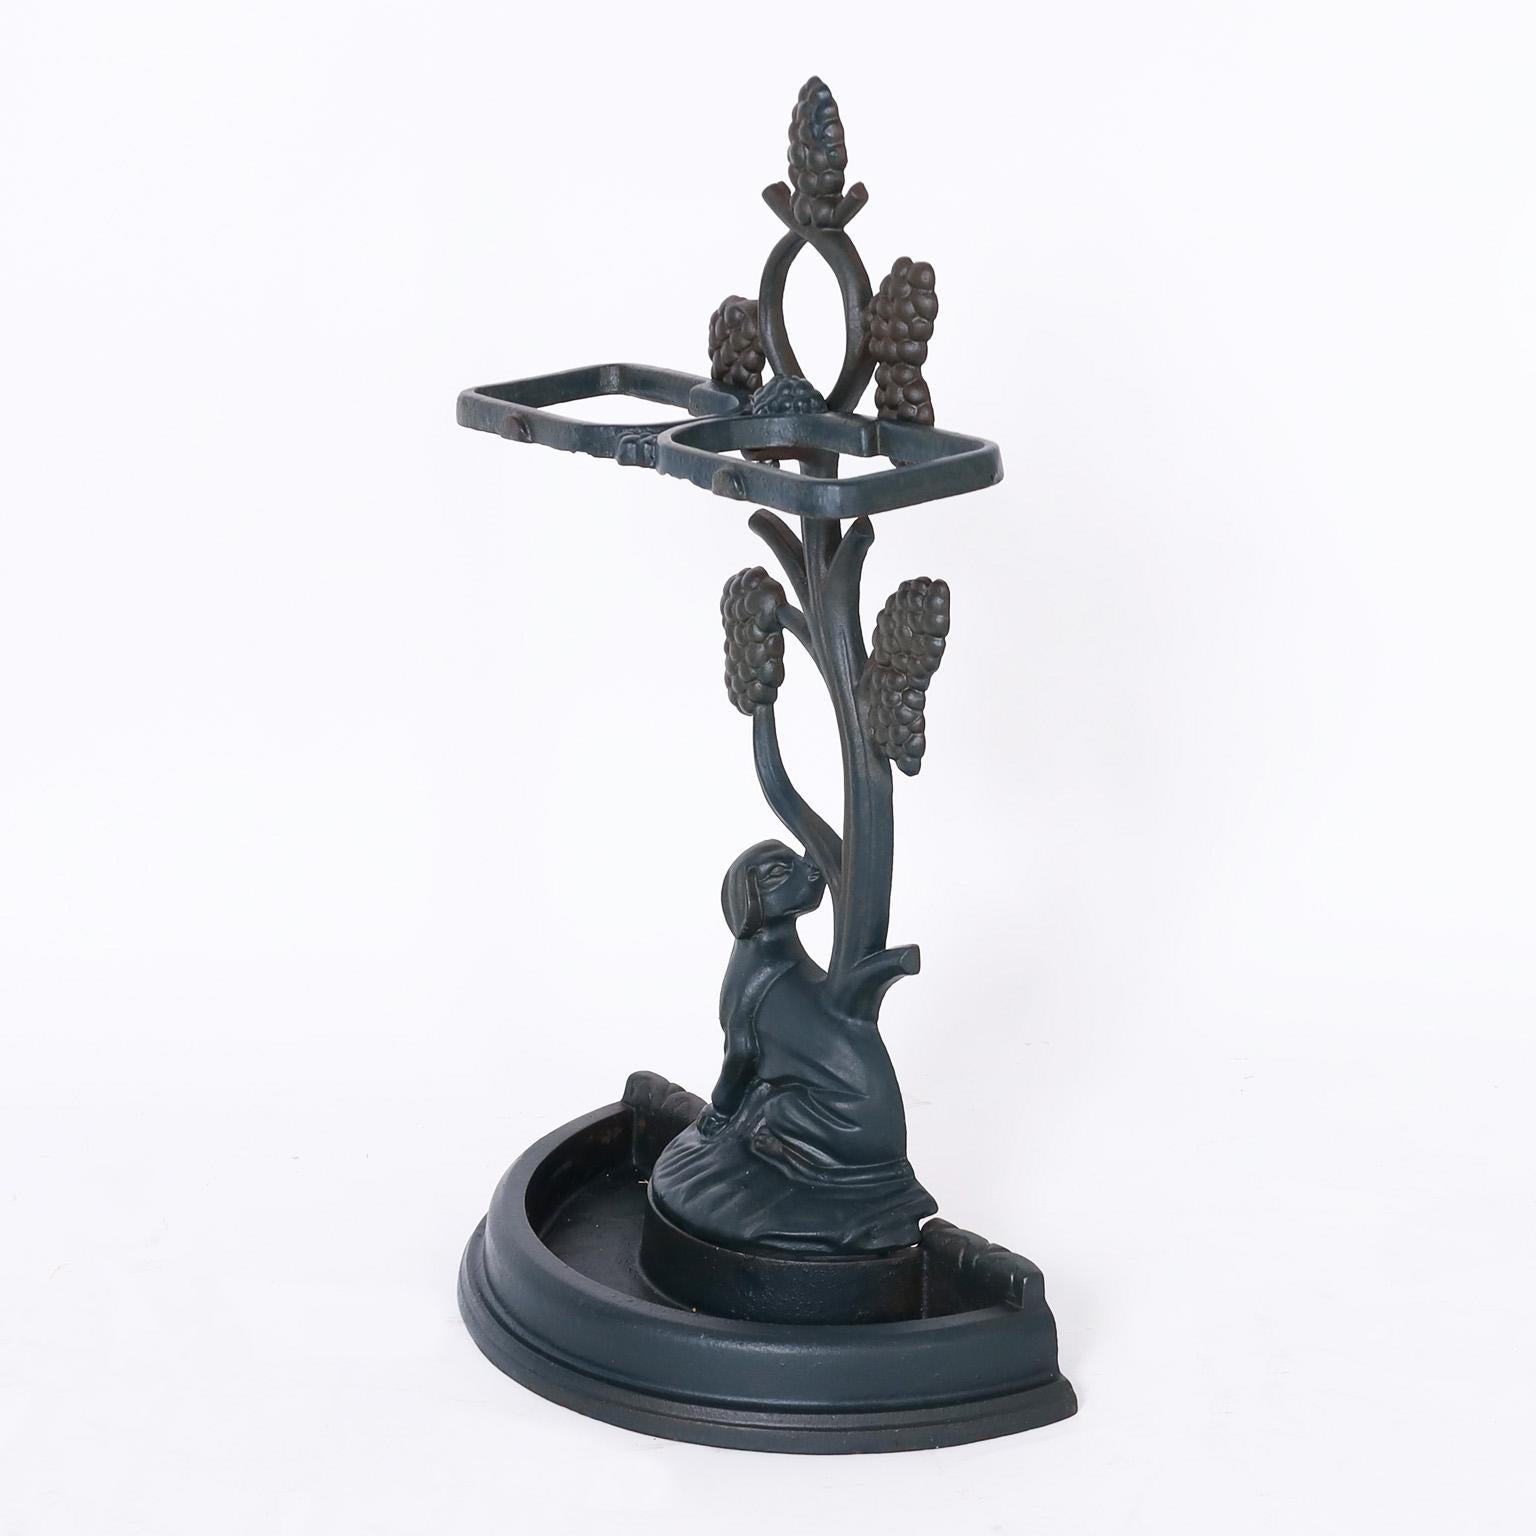 Charming antique English umbrella stand cast in iron with a top bracket supported by a stylized tree over a hunting dog with a water tray.